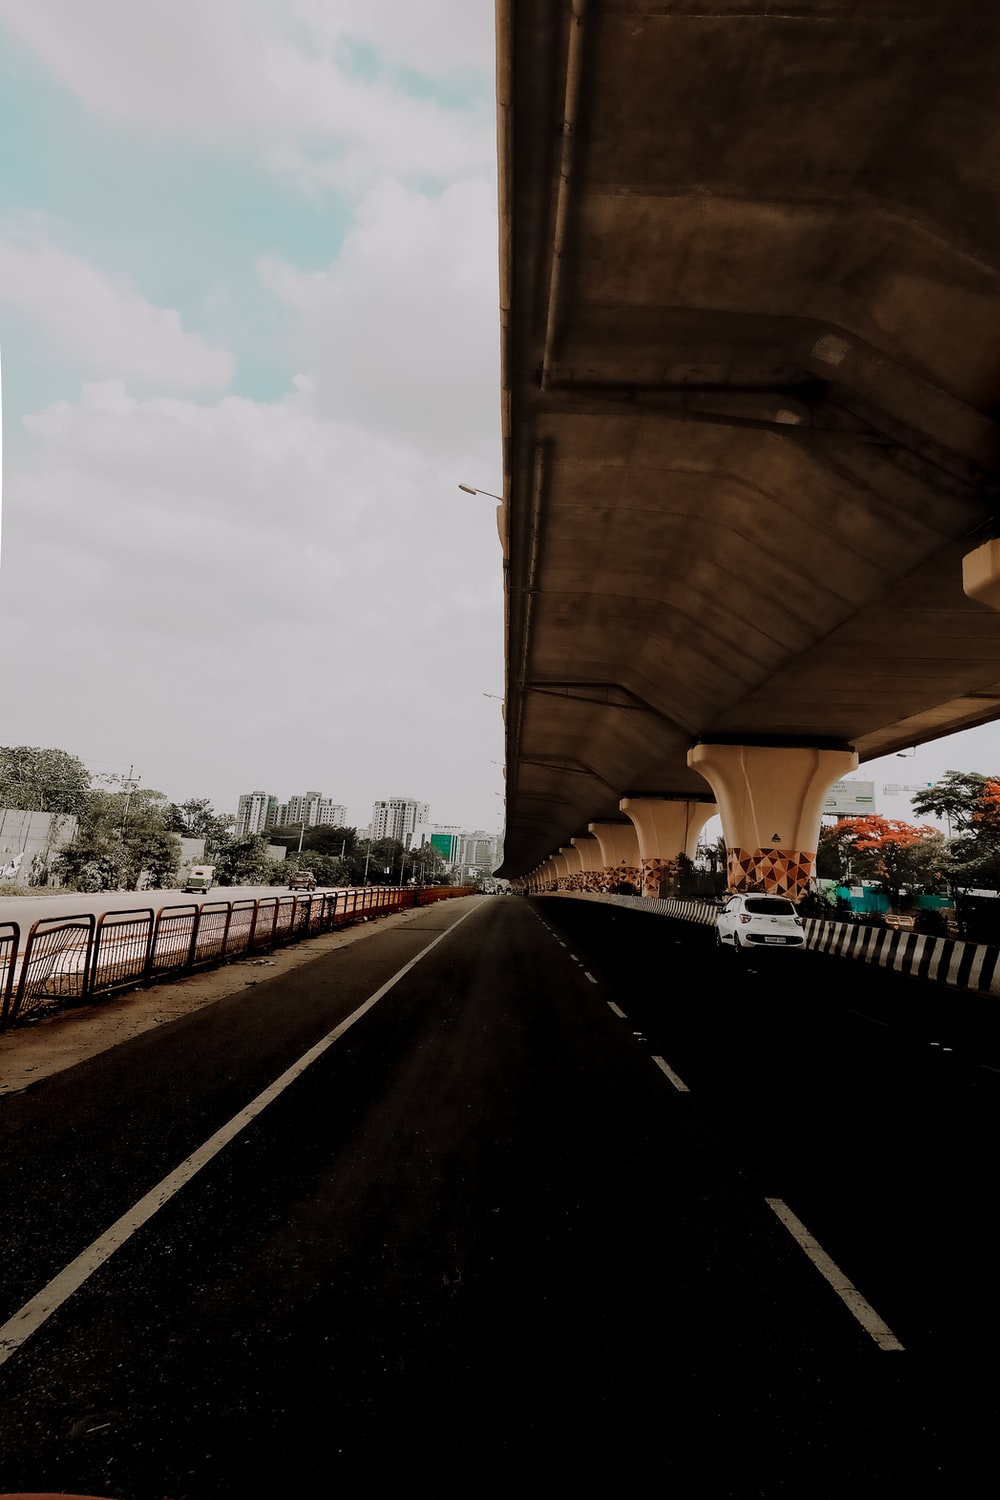 Indian Highway Picture. Download Free Image